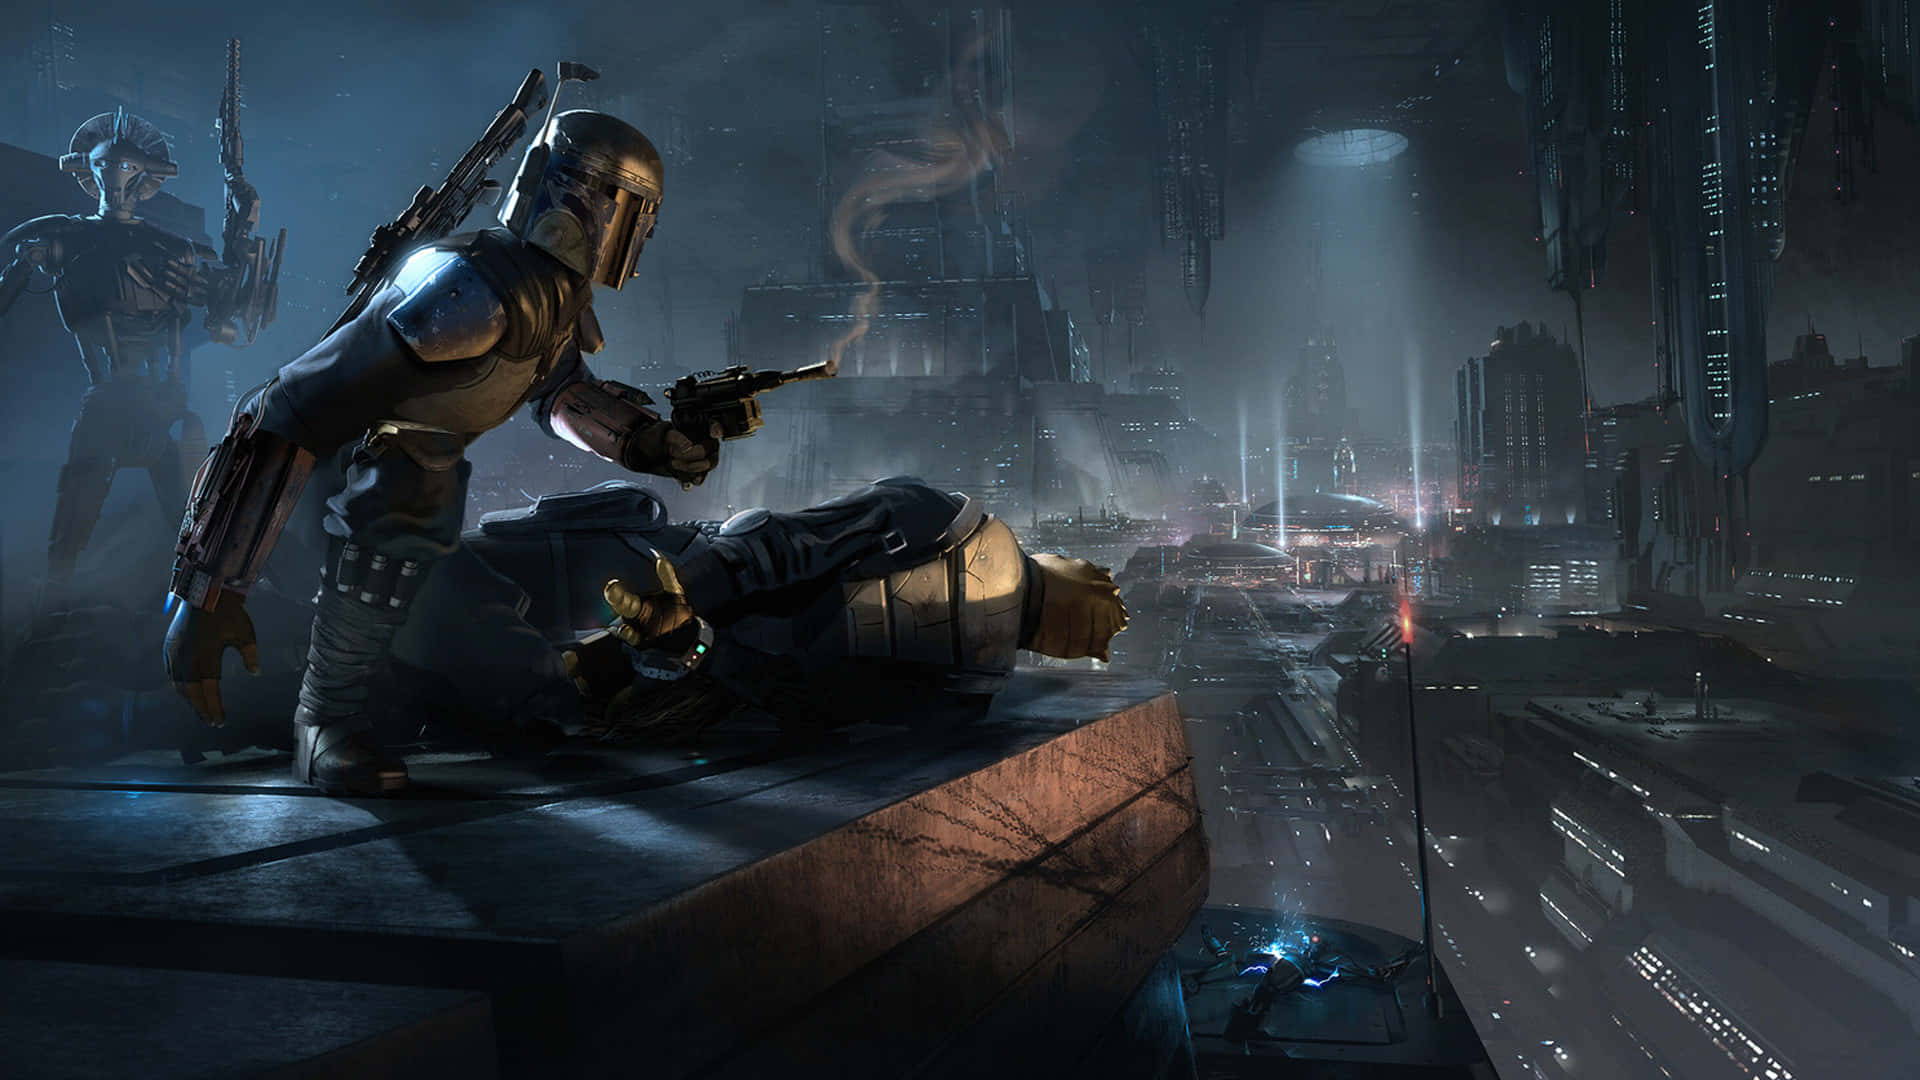 Boba Fett leads the way in The War Of The Bounty Hunters Wallpaper